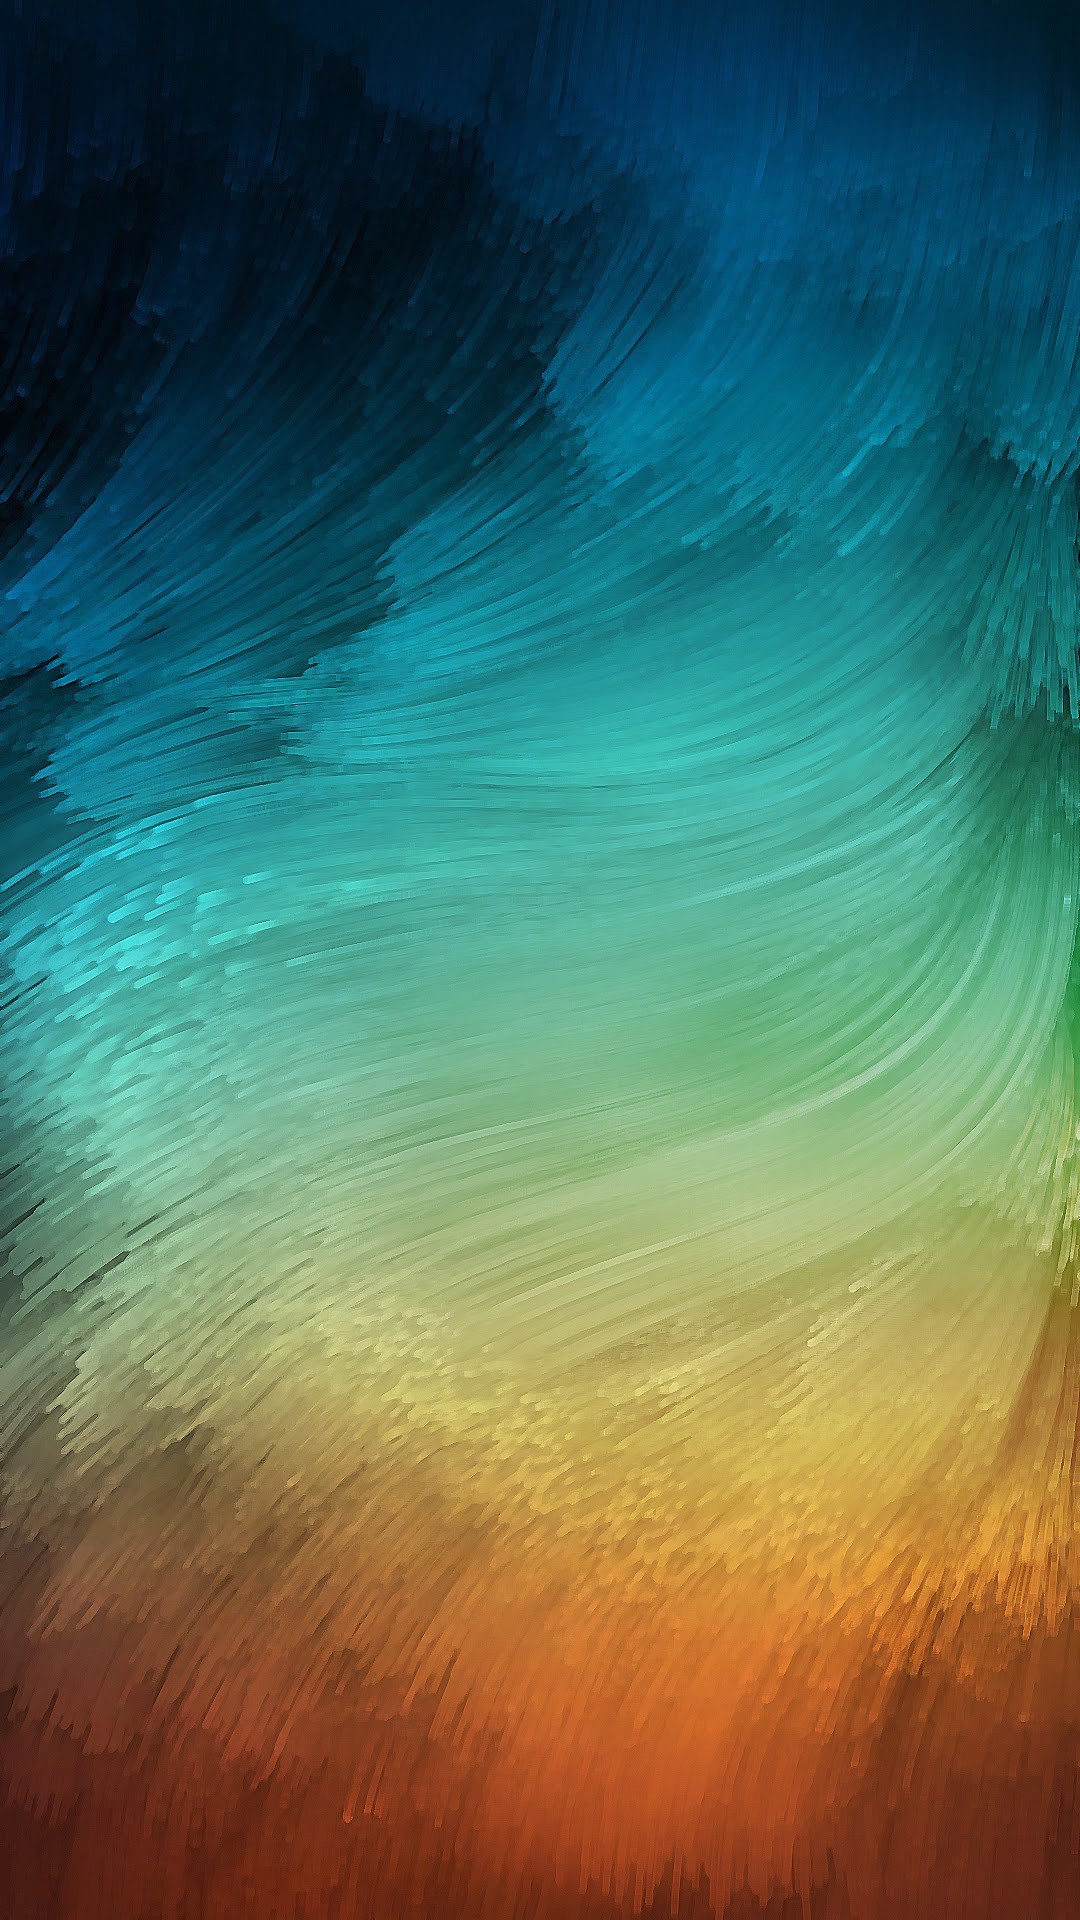 Ios 9 Wallpaper Ipad - We've gathered more than 5 million images